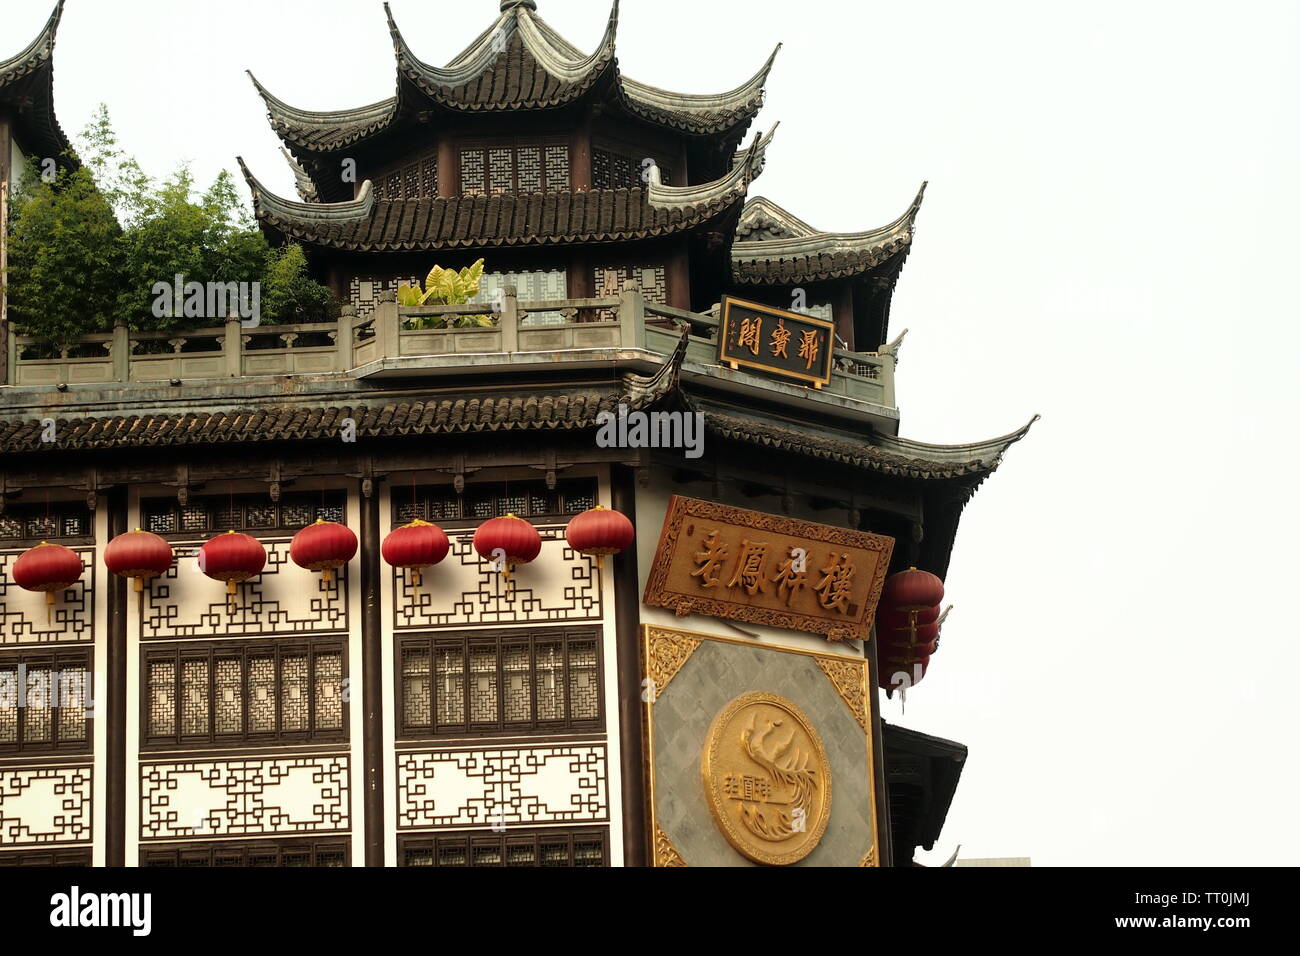 Chinese temple building in Shanghai under clear sky Stock Photo